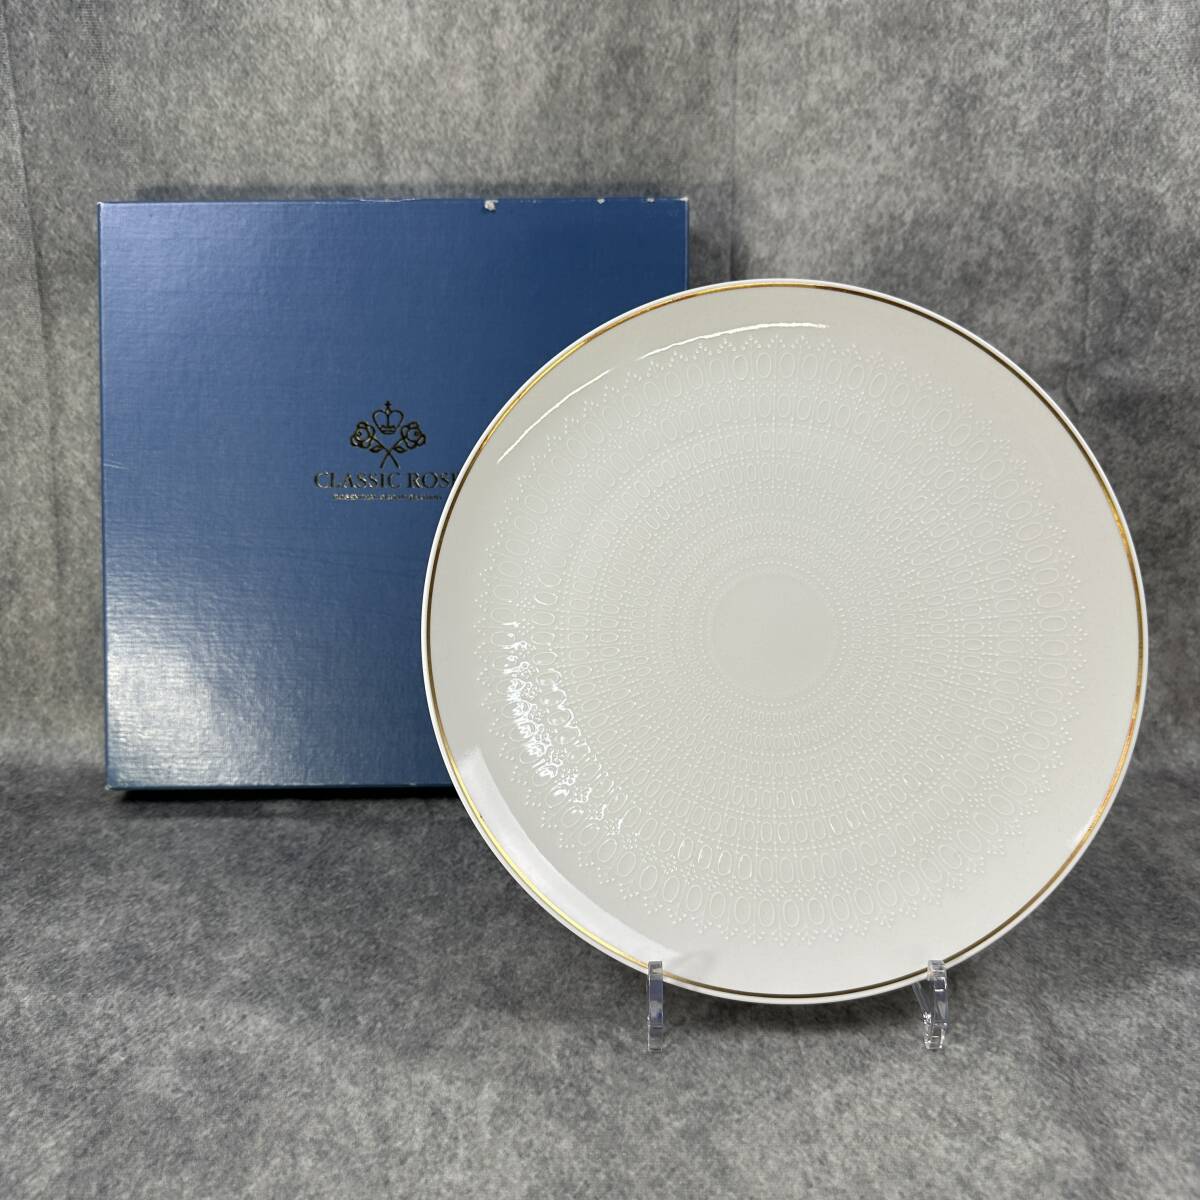 Rosenthal Classic Rose plate 27.5cm gold . white Germany made Rosenthal Classic rose white porcelain ceramics Western-style tableware . plate (RD-059)